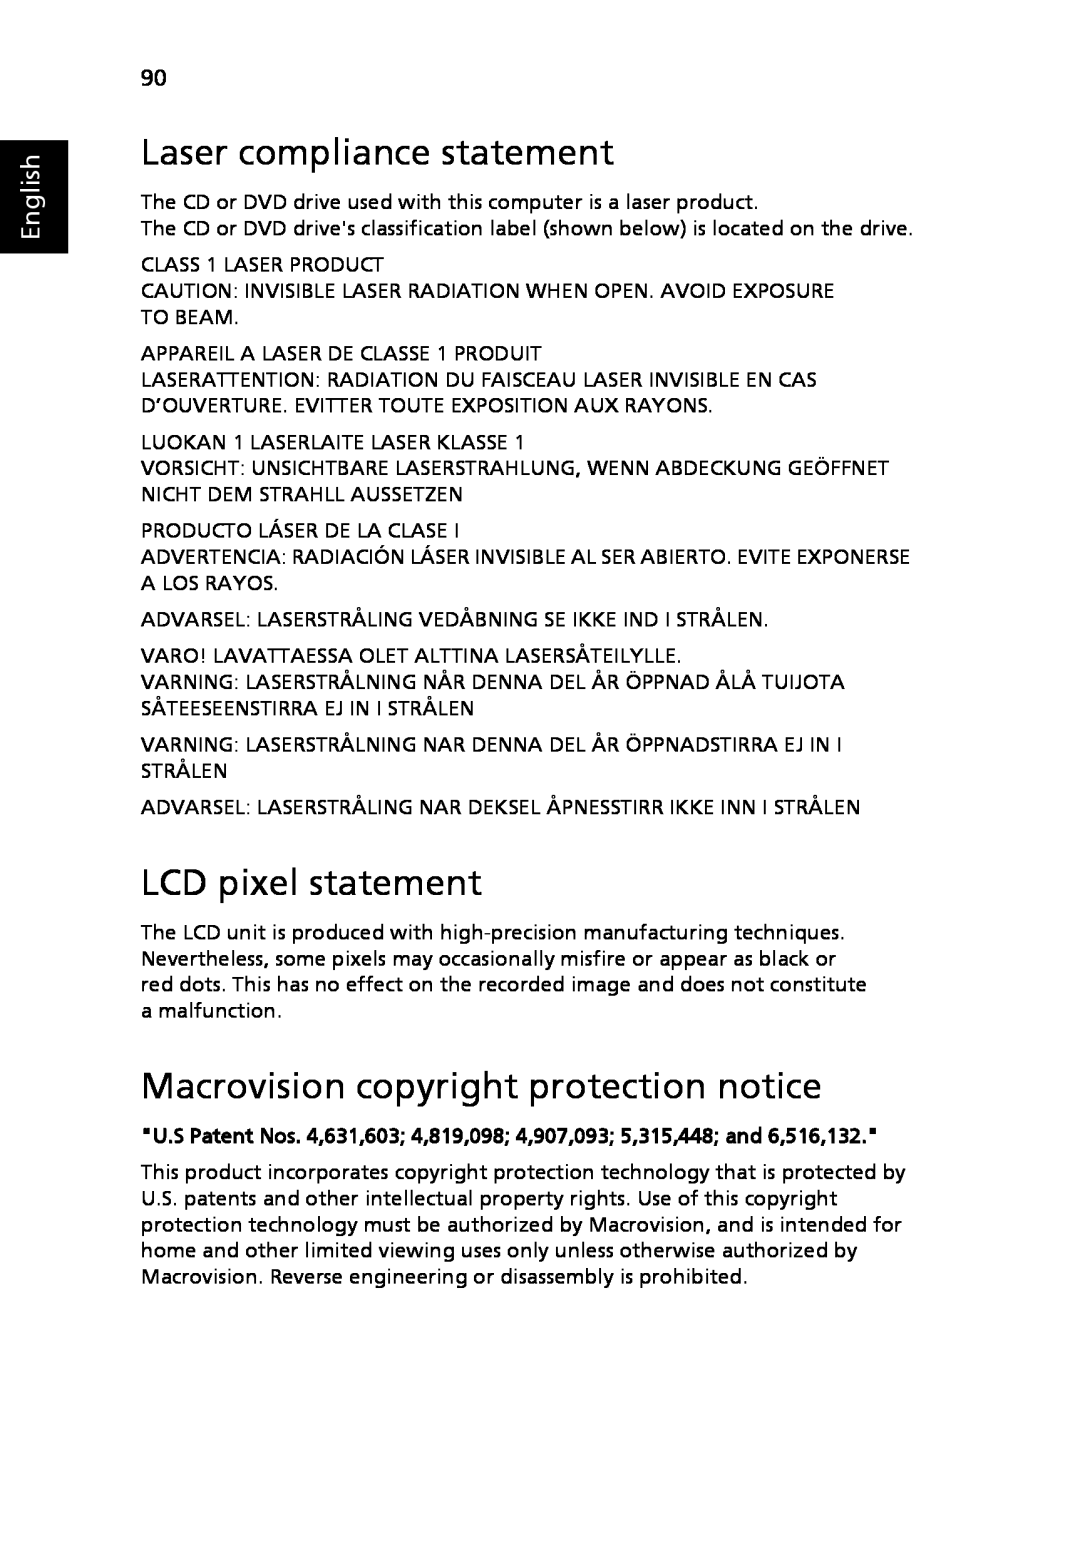 Acer 5520G, 5220 manual Laser compliance statement, LCD pixel statement, Macrovision copyright protection notice, English 